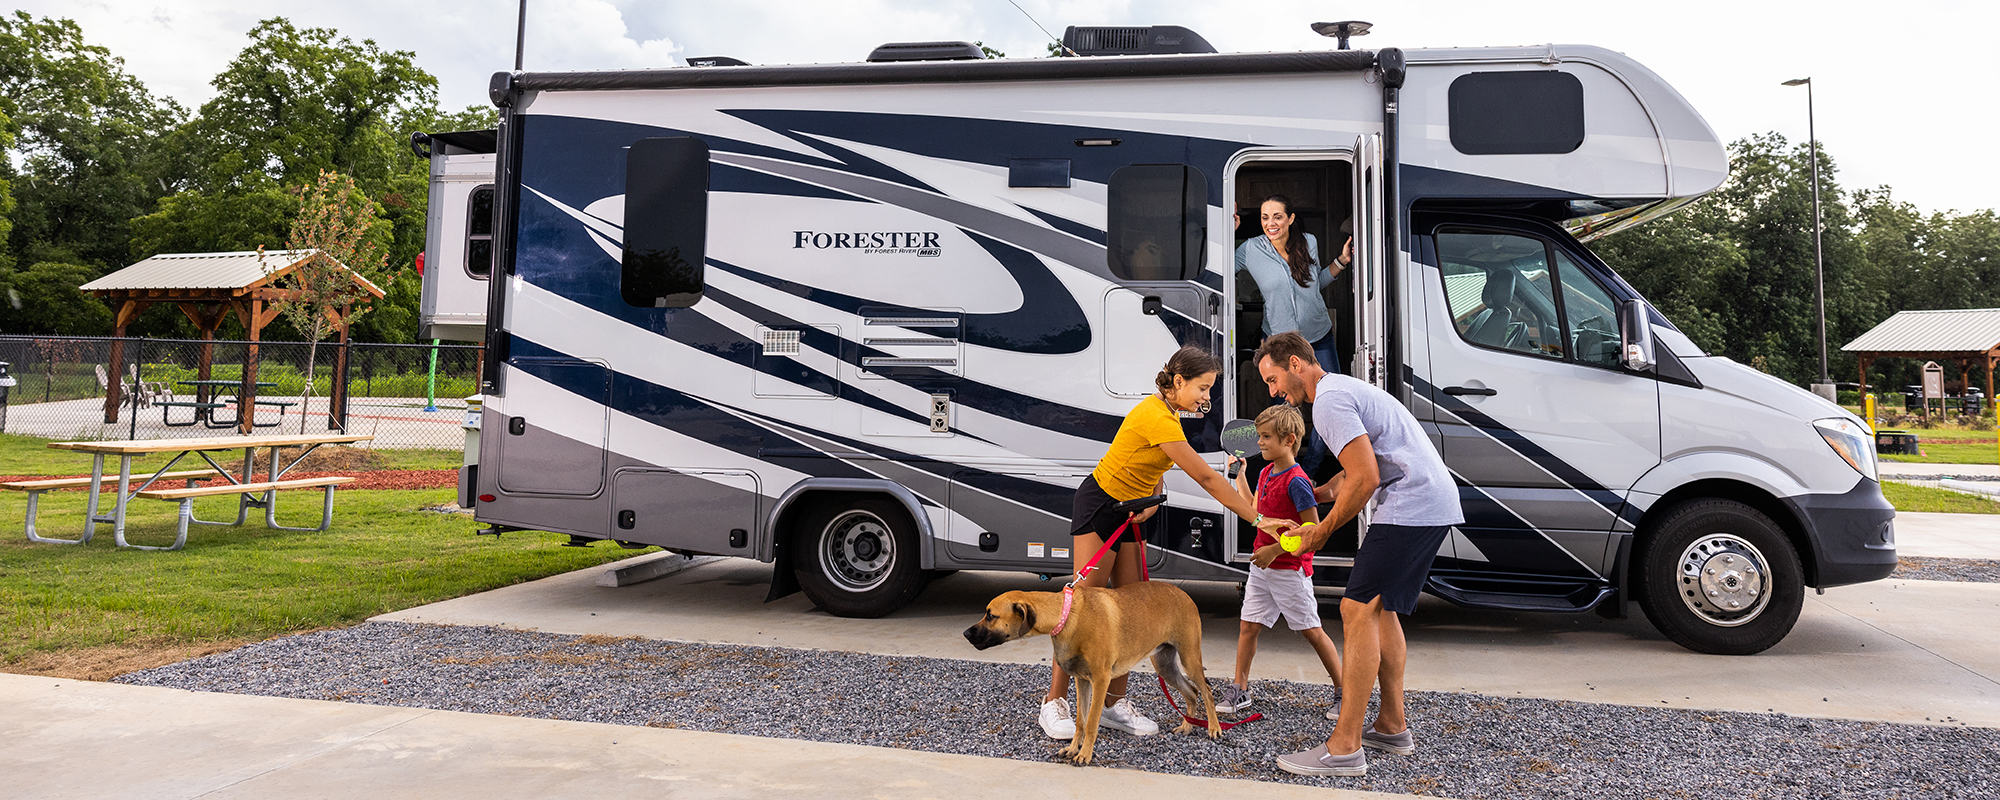 Family in front of an RV.